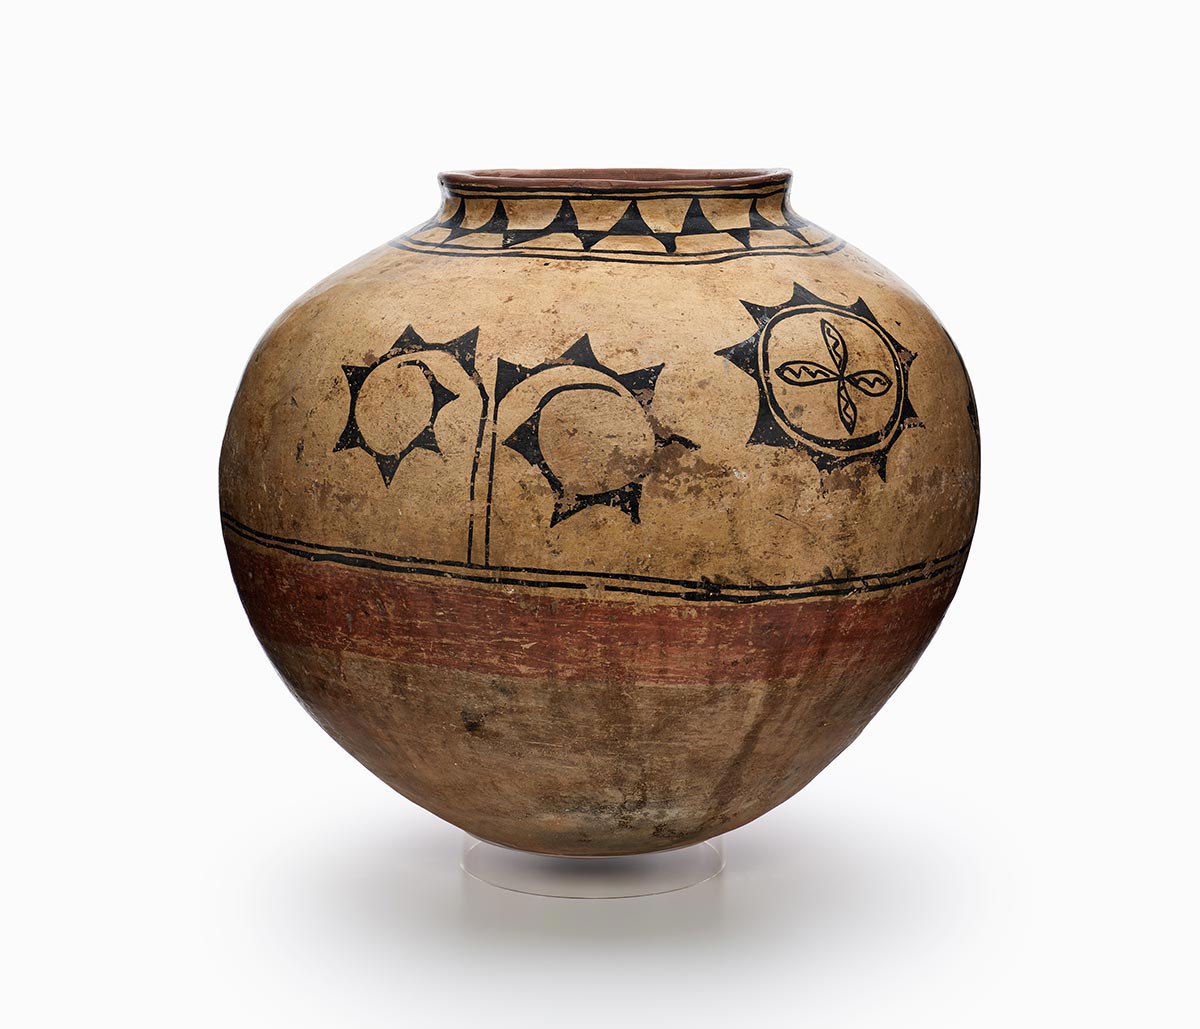 A three-color Cochiti Kiua storage jar features white slip with black and red painted decoration.